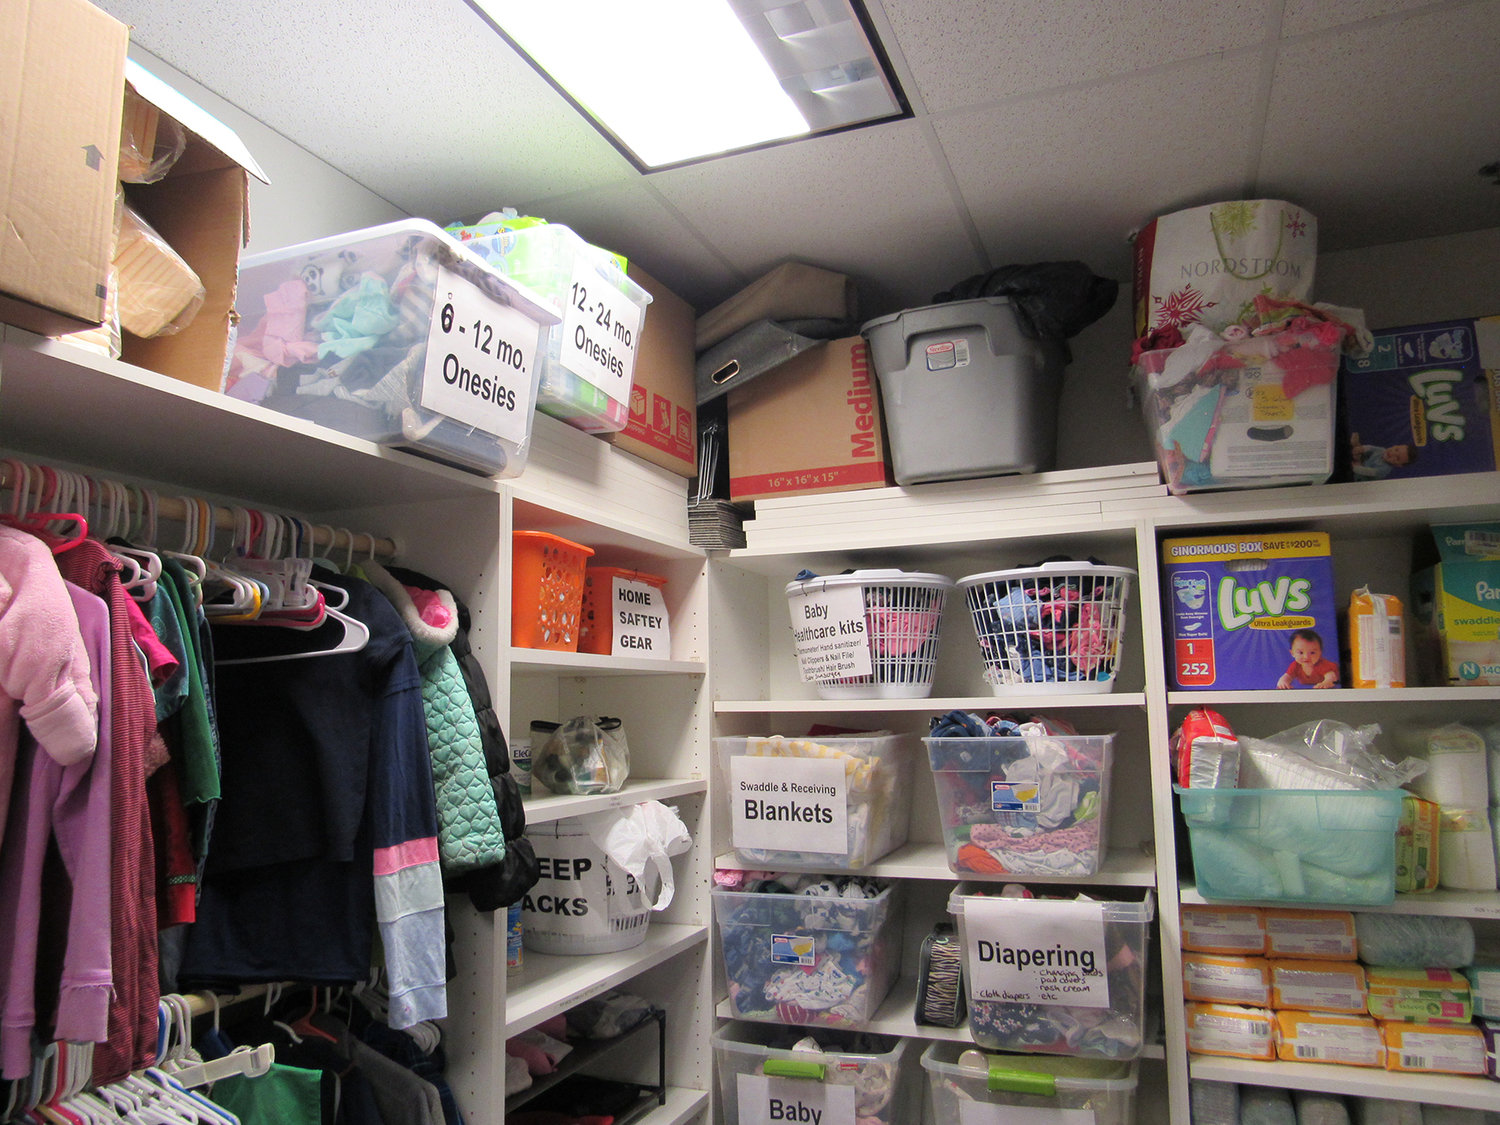 Family Education &amp; Support Service provides plenty of diapers, blankets and children’s clothing at no cost to its patients.